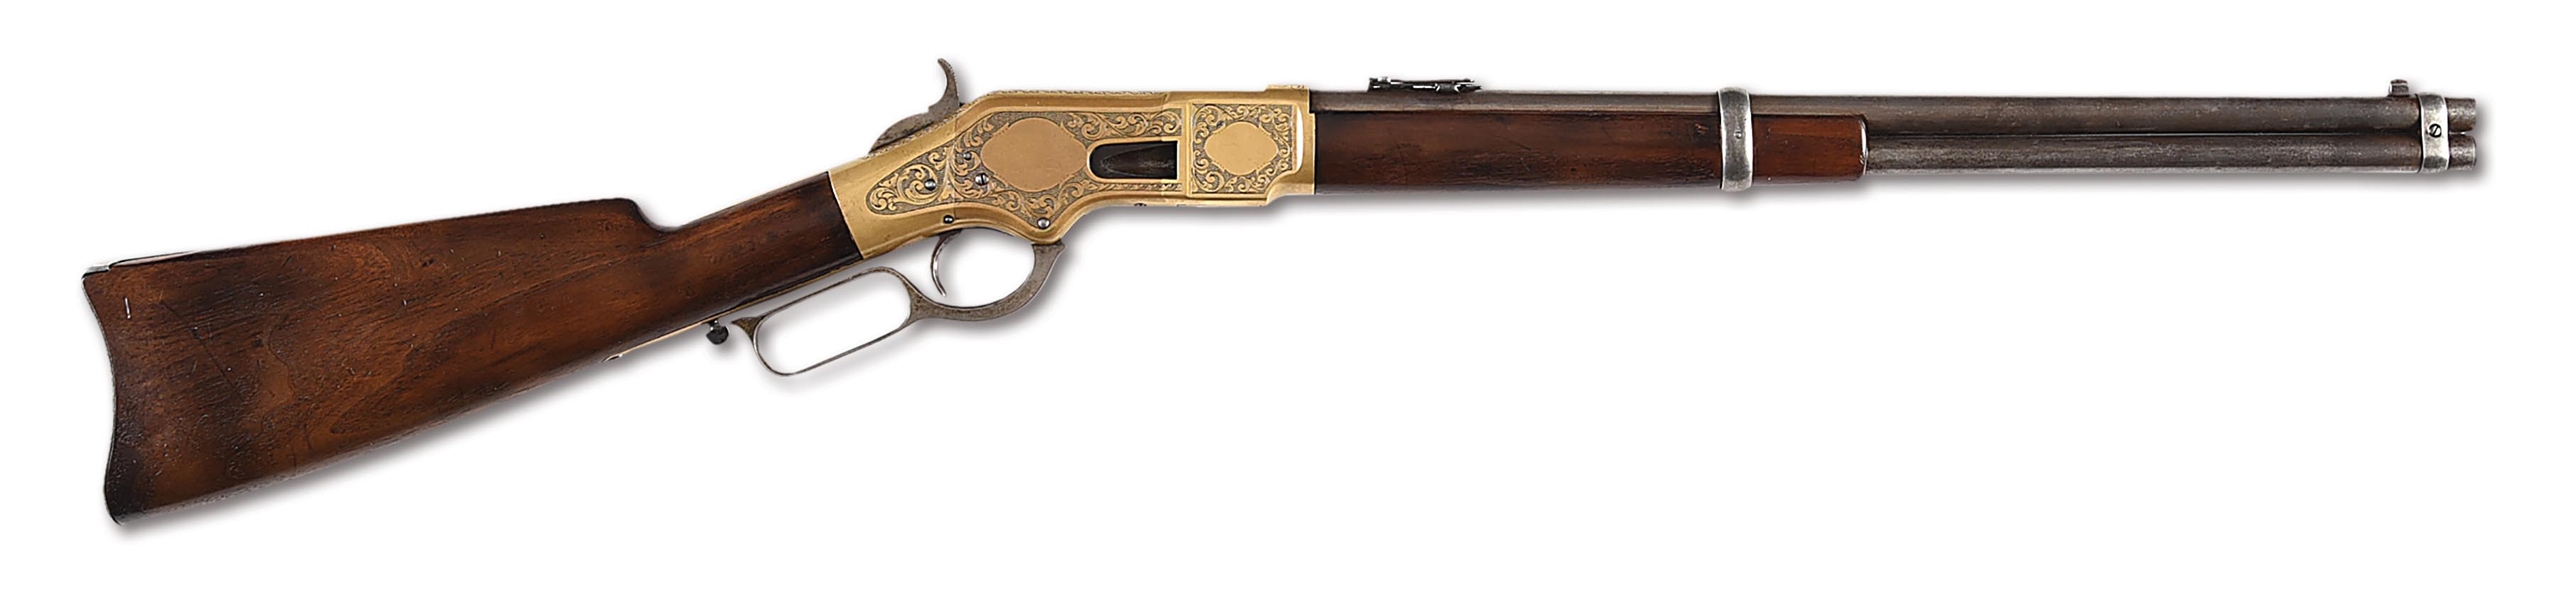 (A) ATTRACTIVE JOHN ULRICH ENGRAVED WINCHESTER MODEL 1866 LEVER ACTION CARBINE.